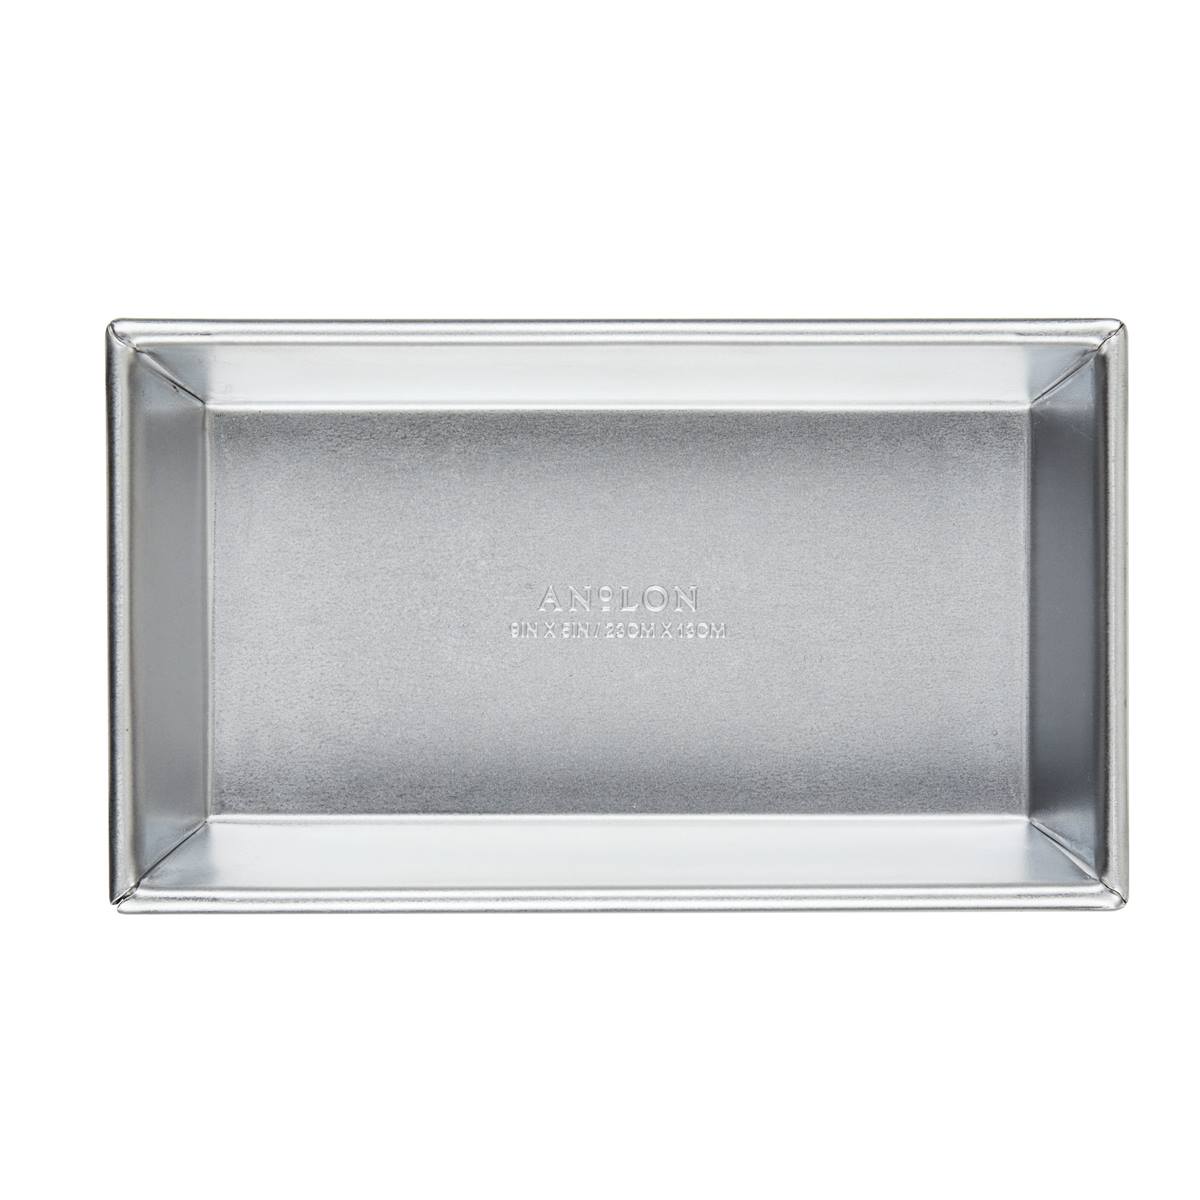 Anolon(R) Professional Bakeware 9in. Loaf Pan